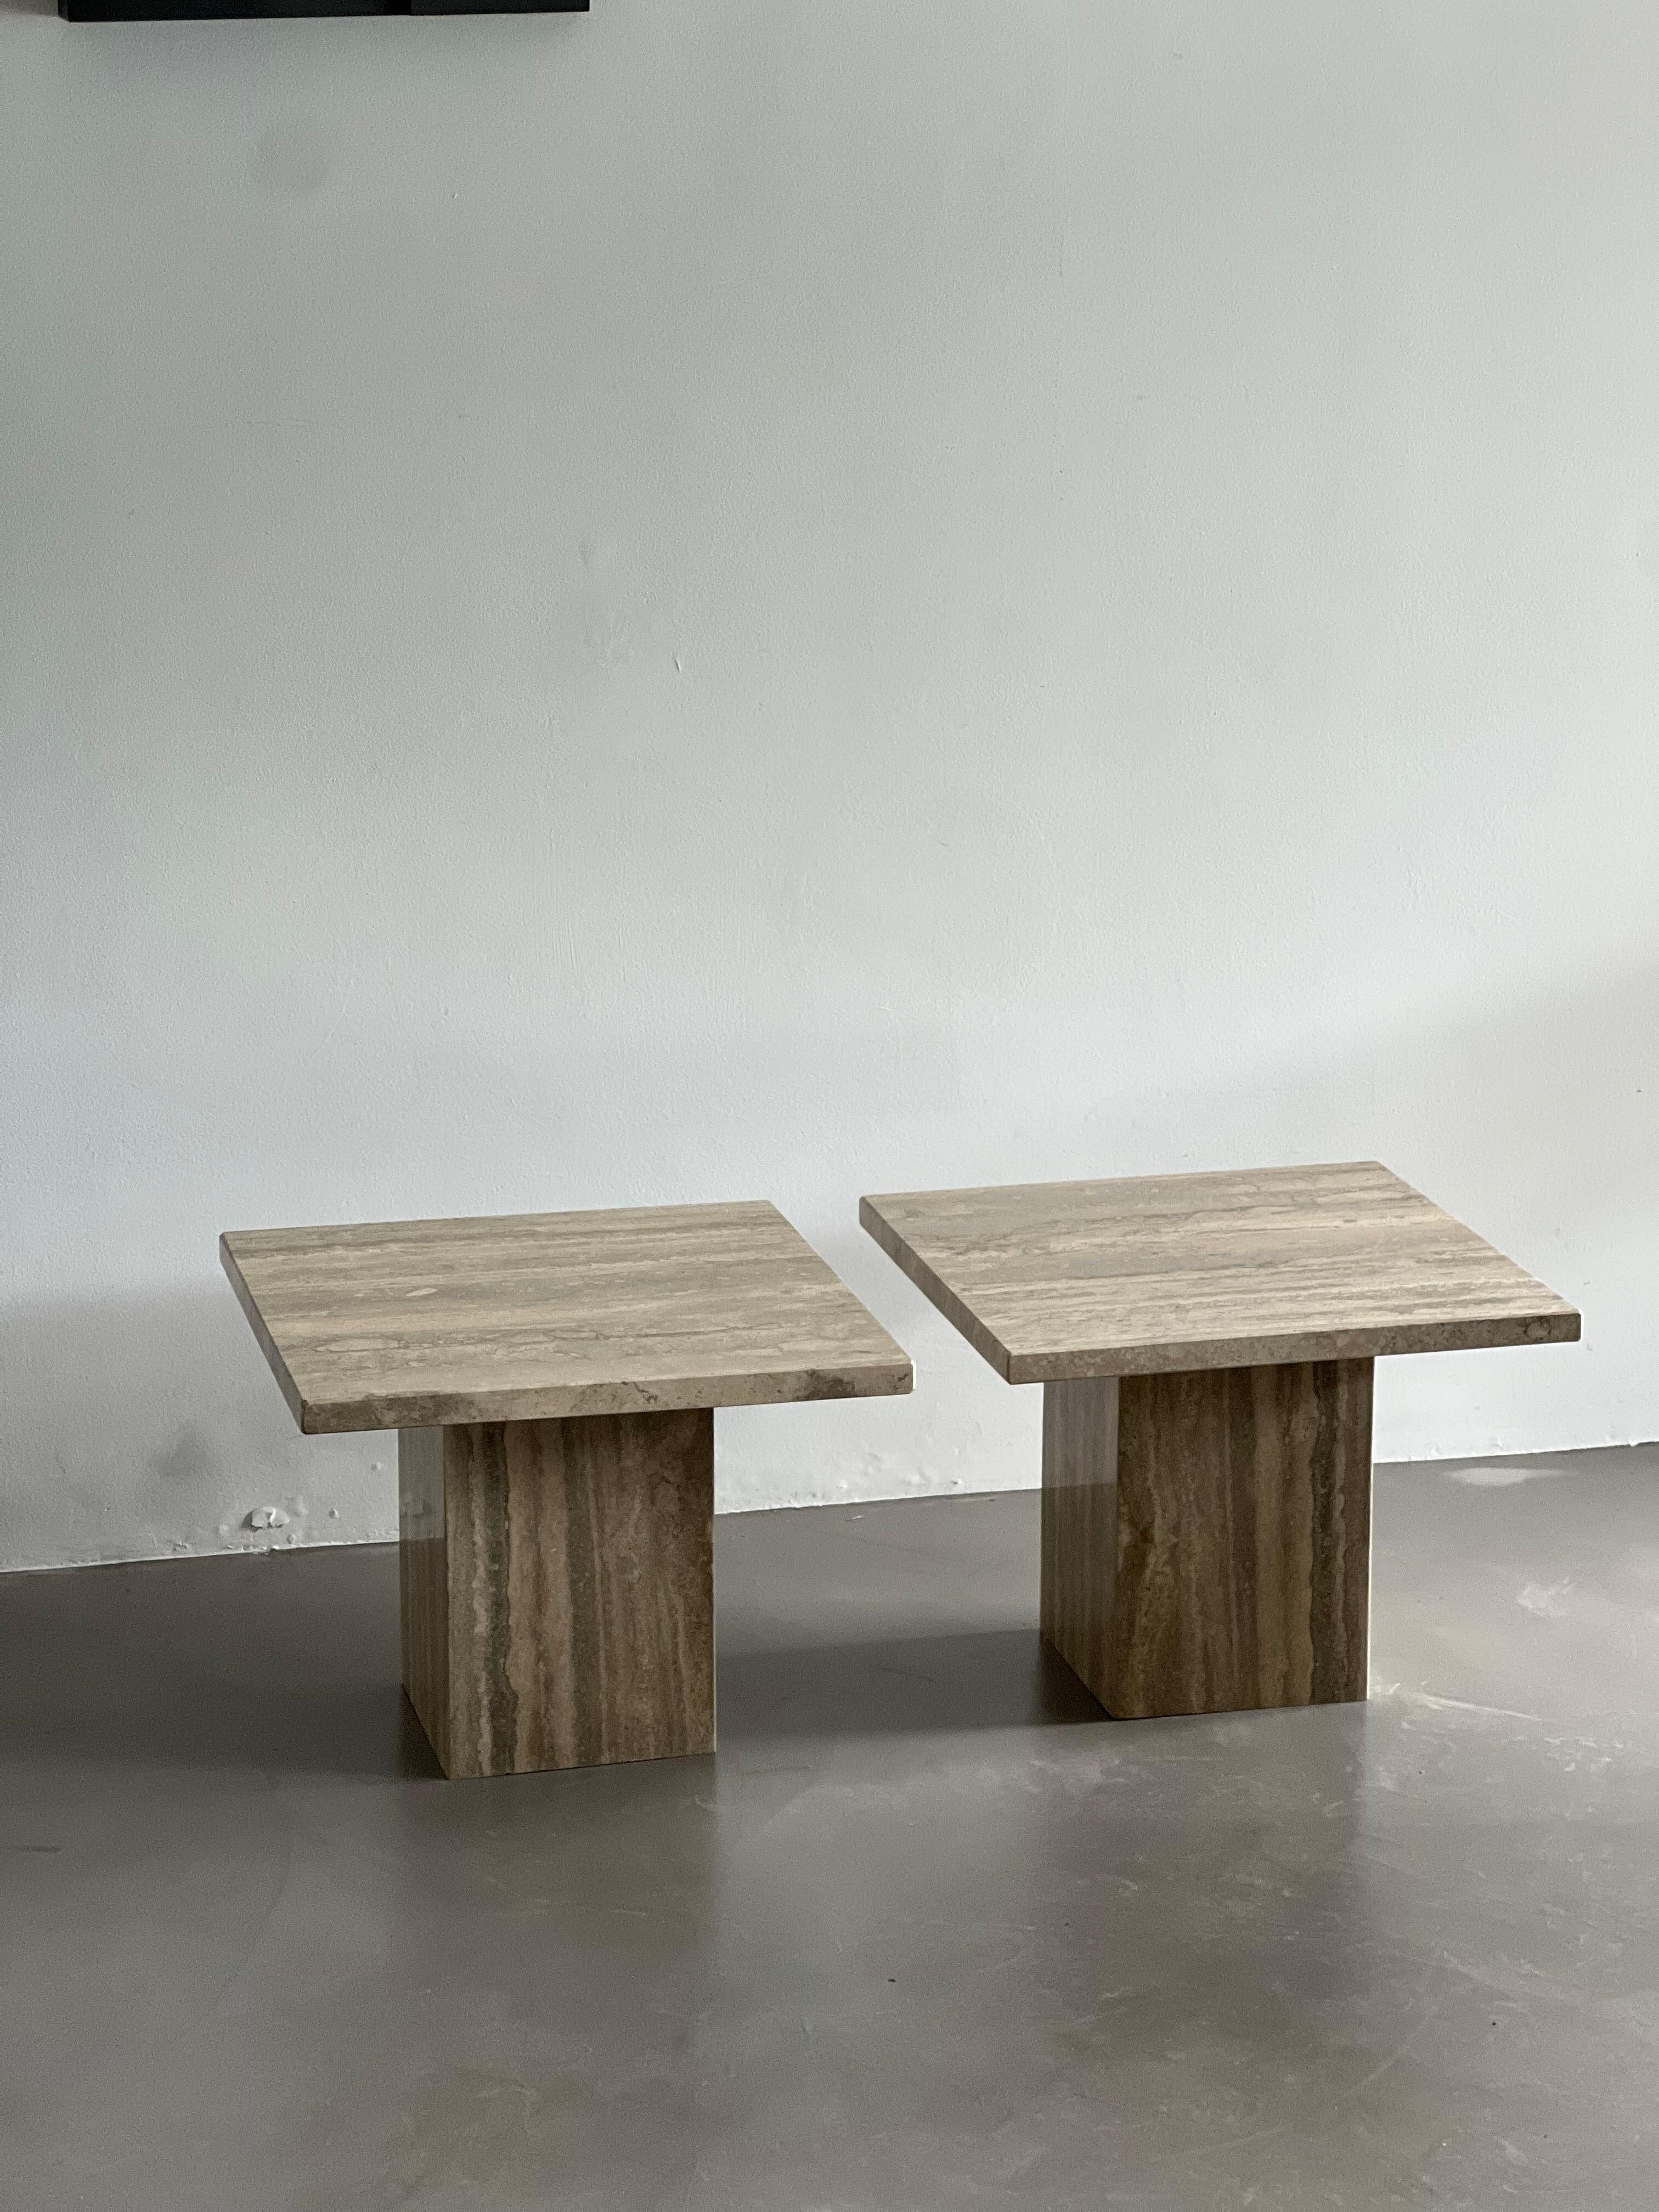 Italian Set of Two Mid-Century Modern Side Tables in Travertine, Urban Wabi Style, Pair For Sale